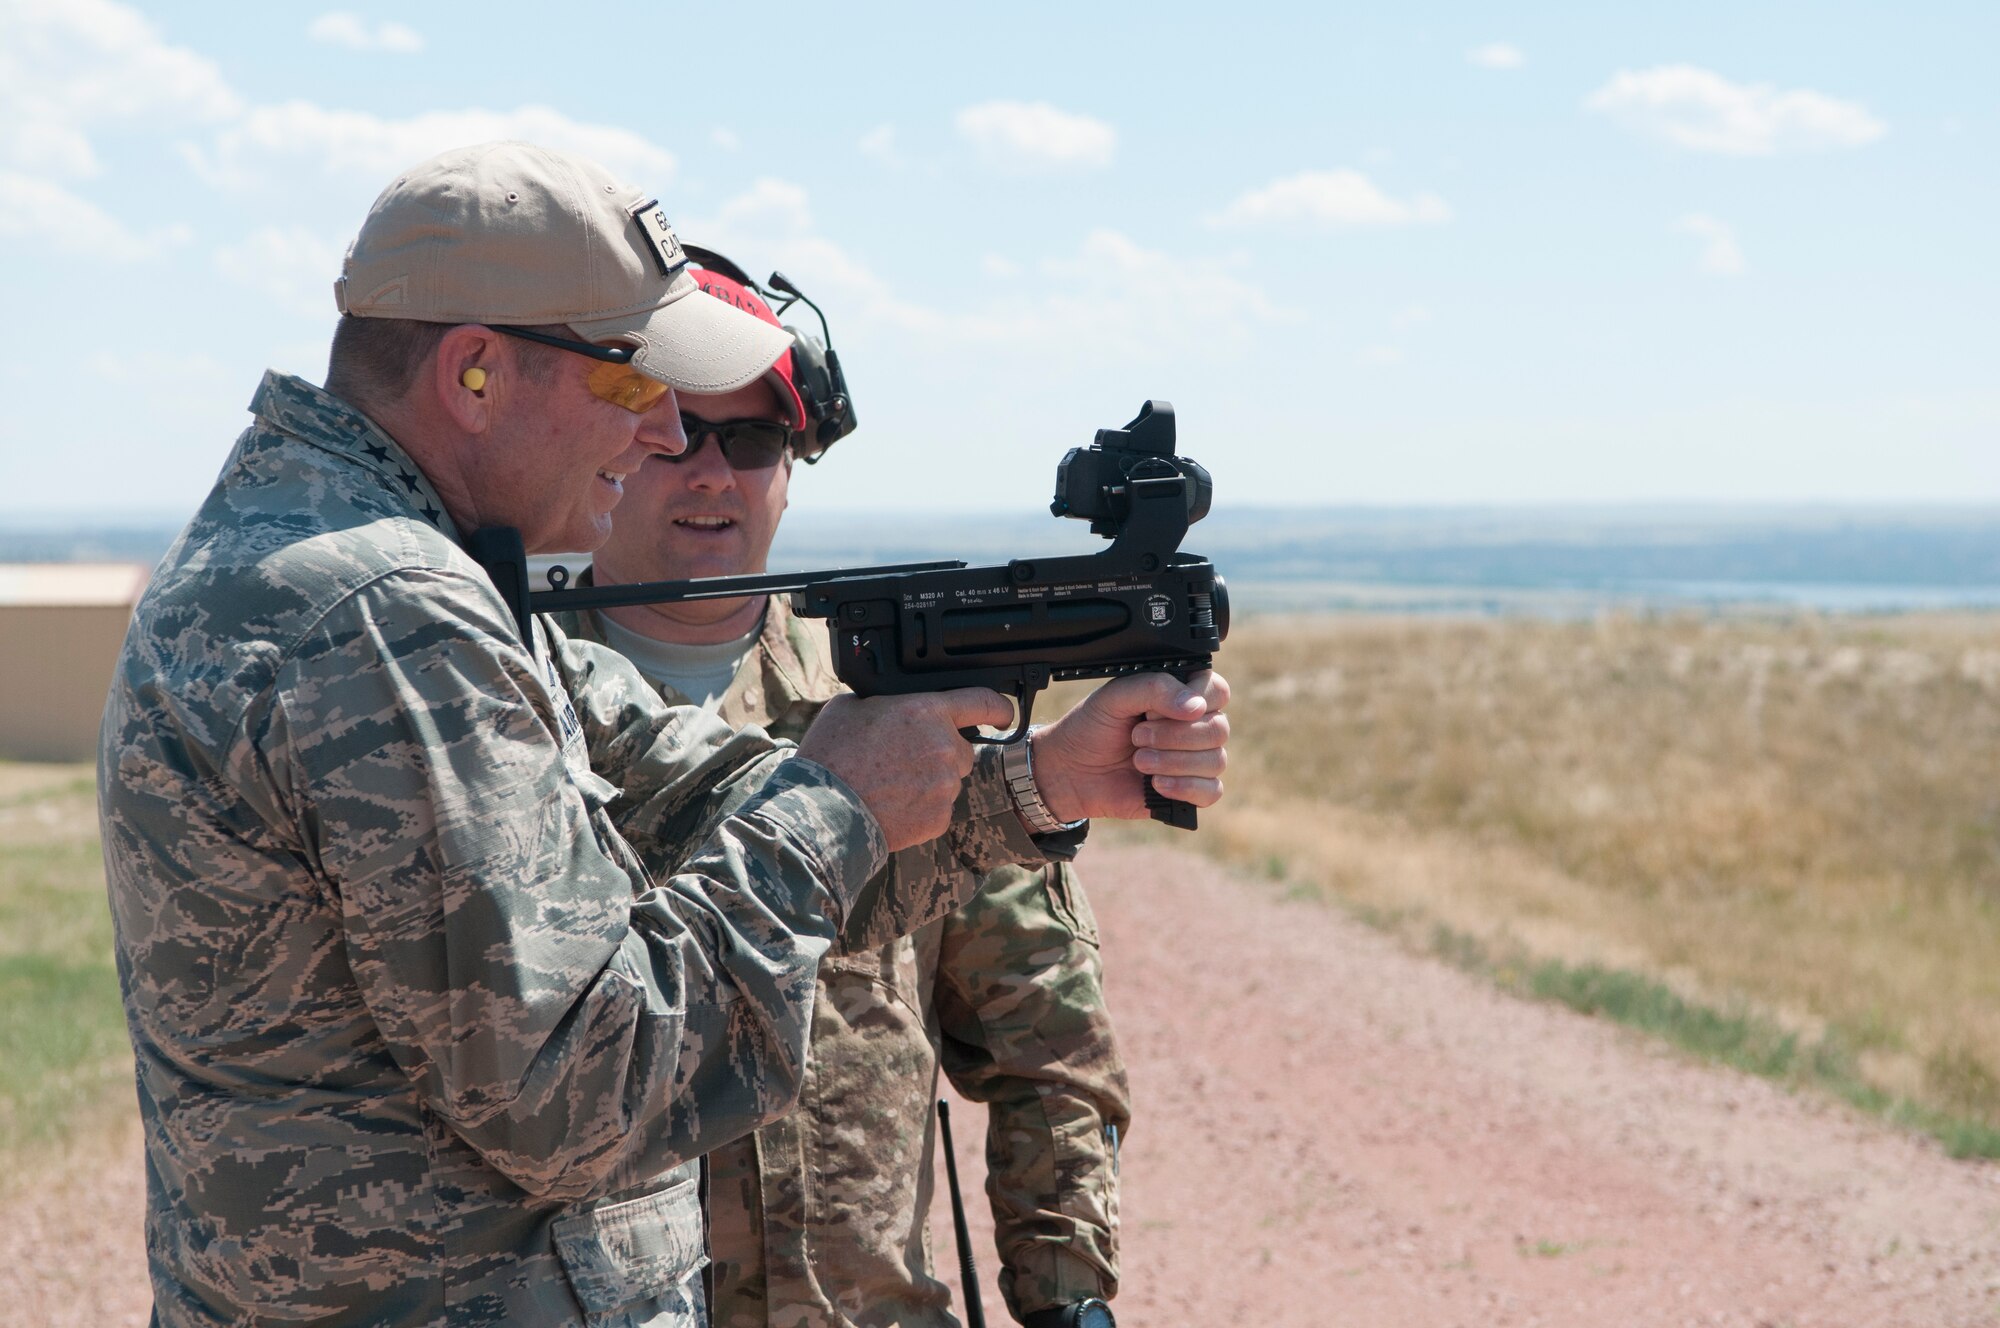 Gen. Robin Rand, AFGSC commander, fires a grenade launcher, during his visit with the 620th Ground Combat Training Squadron at Camp Guernsey, Wyo., July 21, 2016. Security Forces Airmen in AFGSC train at Camp Guernsey to maintain and enhance their proficiency in securing nuclear assets. (U.S. Air Force photo by Senior Airman Malcolm Mayfield)